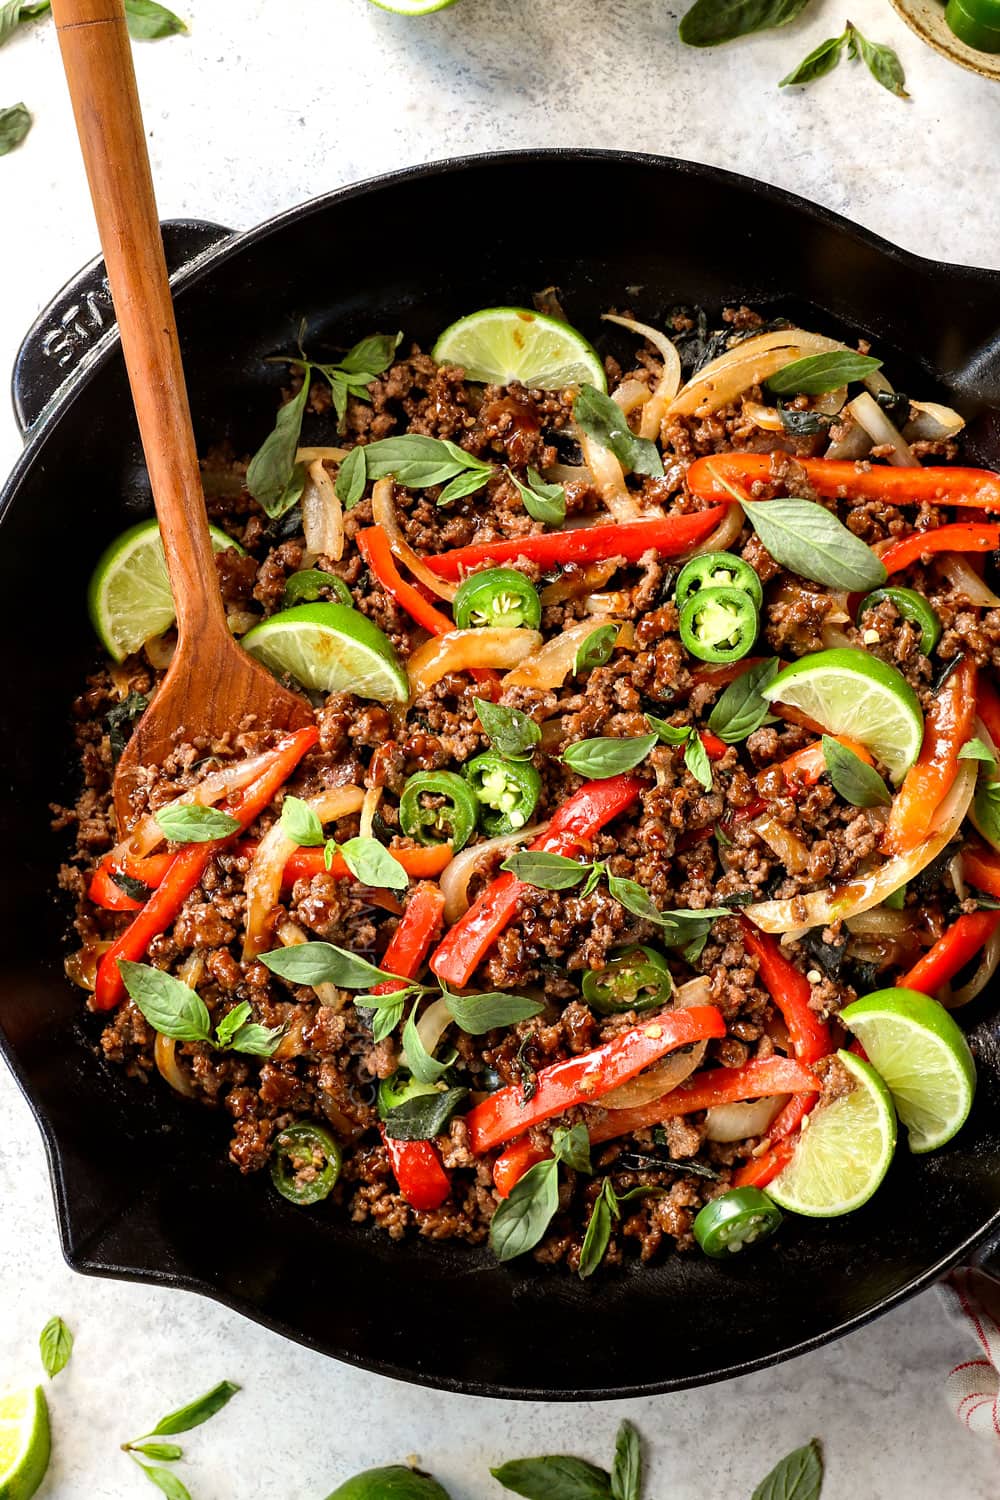 showing how to make Thai Basil Beef (pad krapow) by garnishing with fresh limes and Thai basil